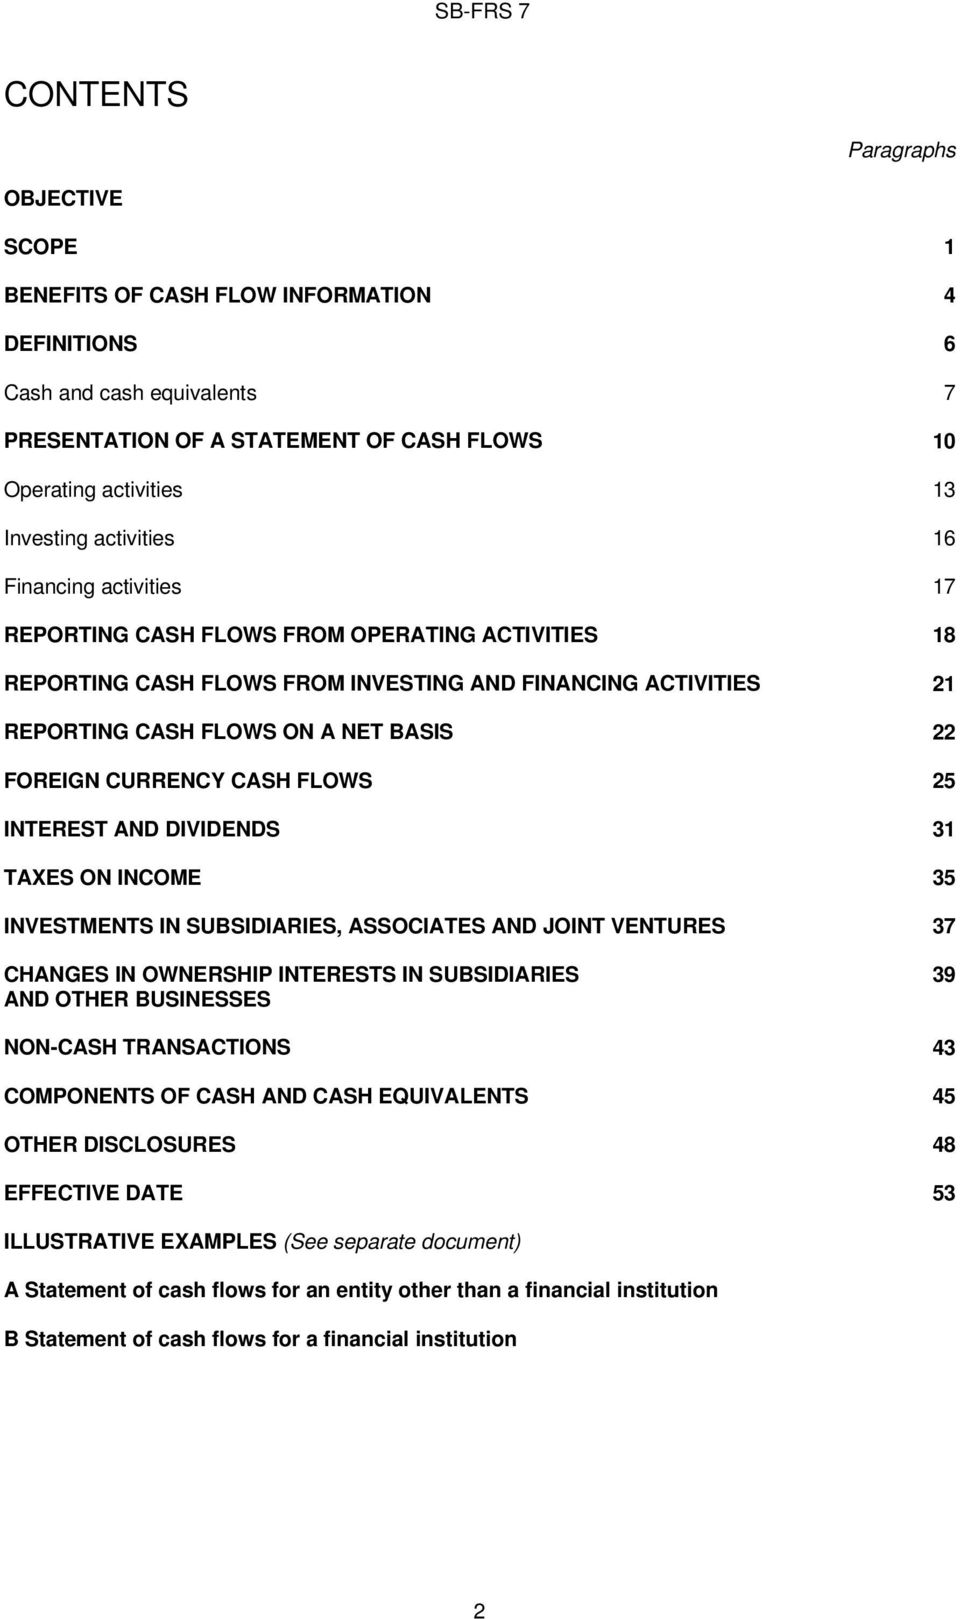 INTEREST AND DIVIDENDS TAXES ON INCOME INVESTMENTS IN SUBSIDIARIES, ASSOCIATES AND JOINT VENTURES CHANGES IN OWNERSHIP INTERESTS IN SUBSIDIARIES AND OTHER BUSINESSES NON-CASH TRANSACTIONS COMPONENTS